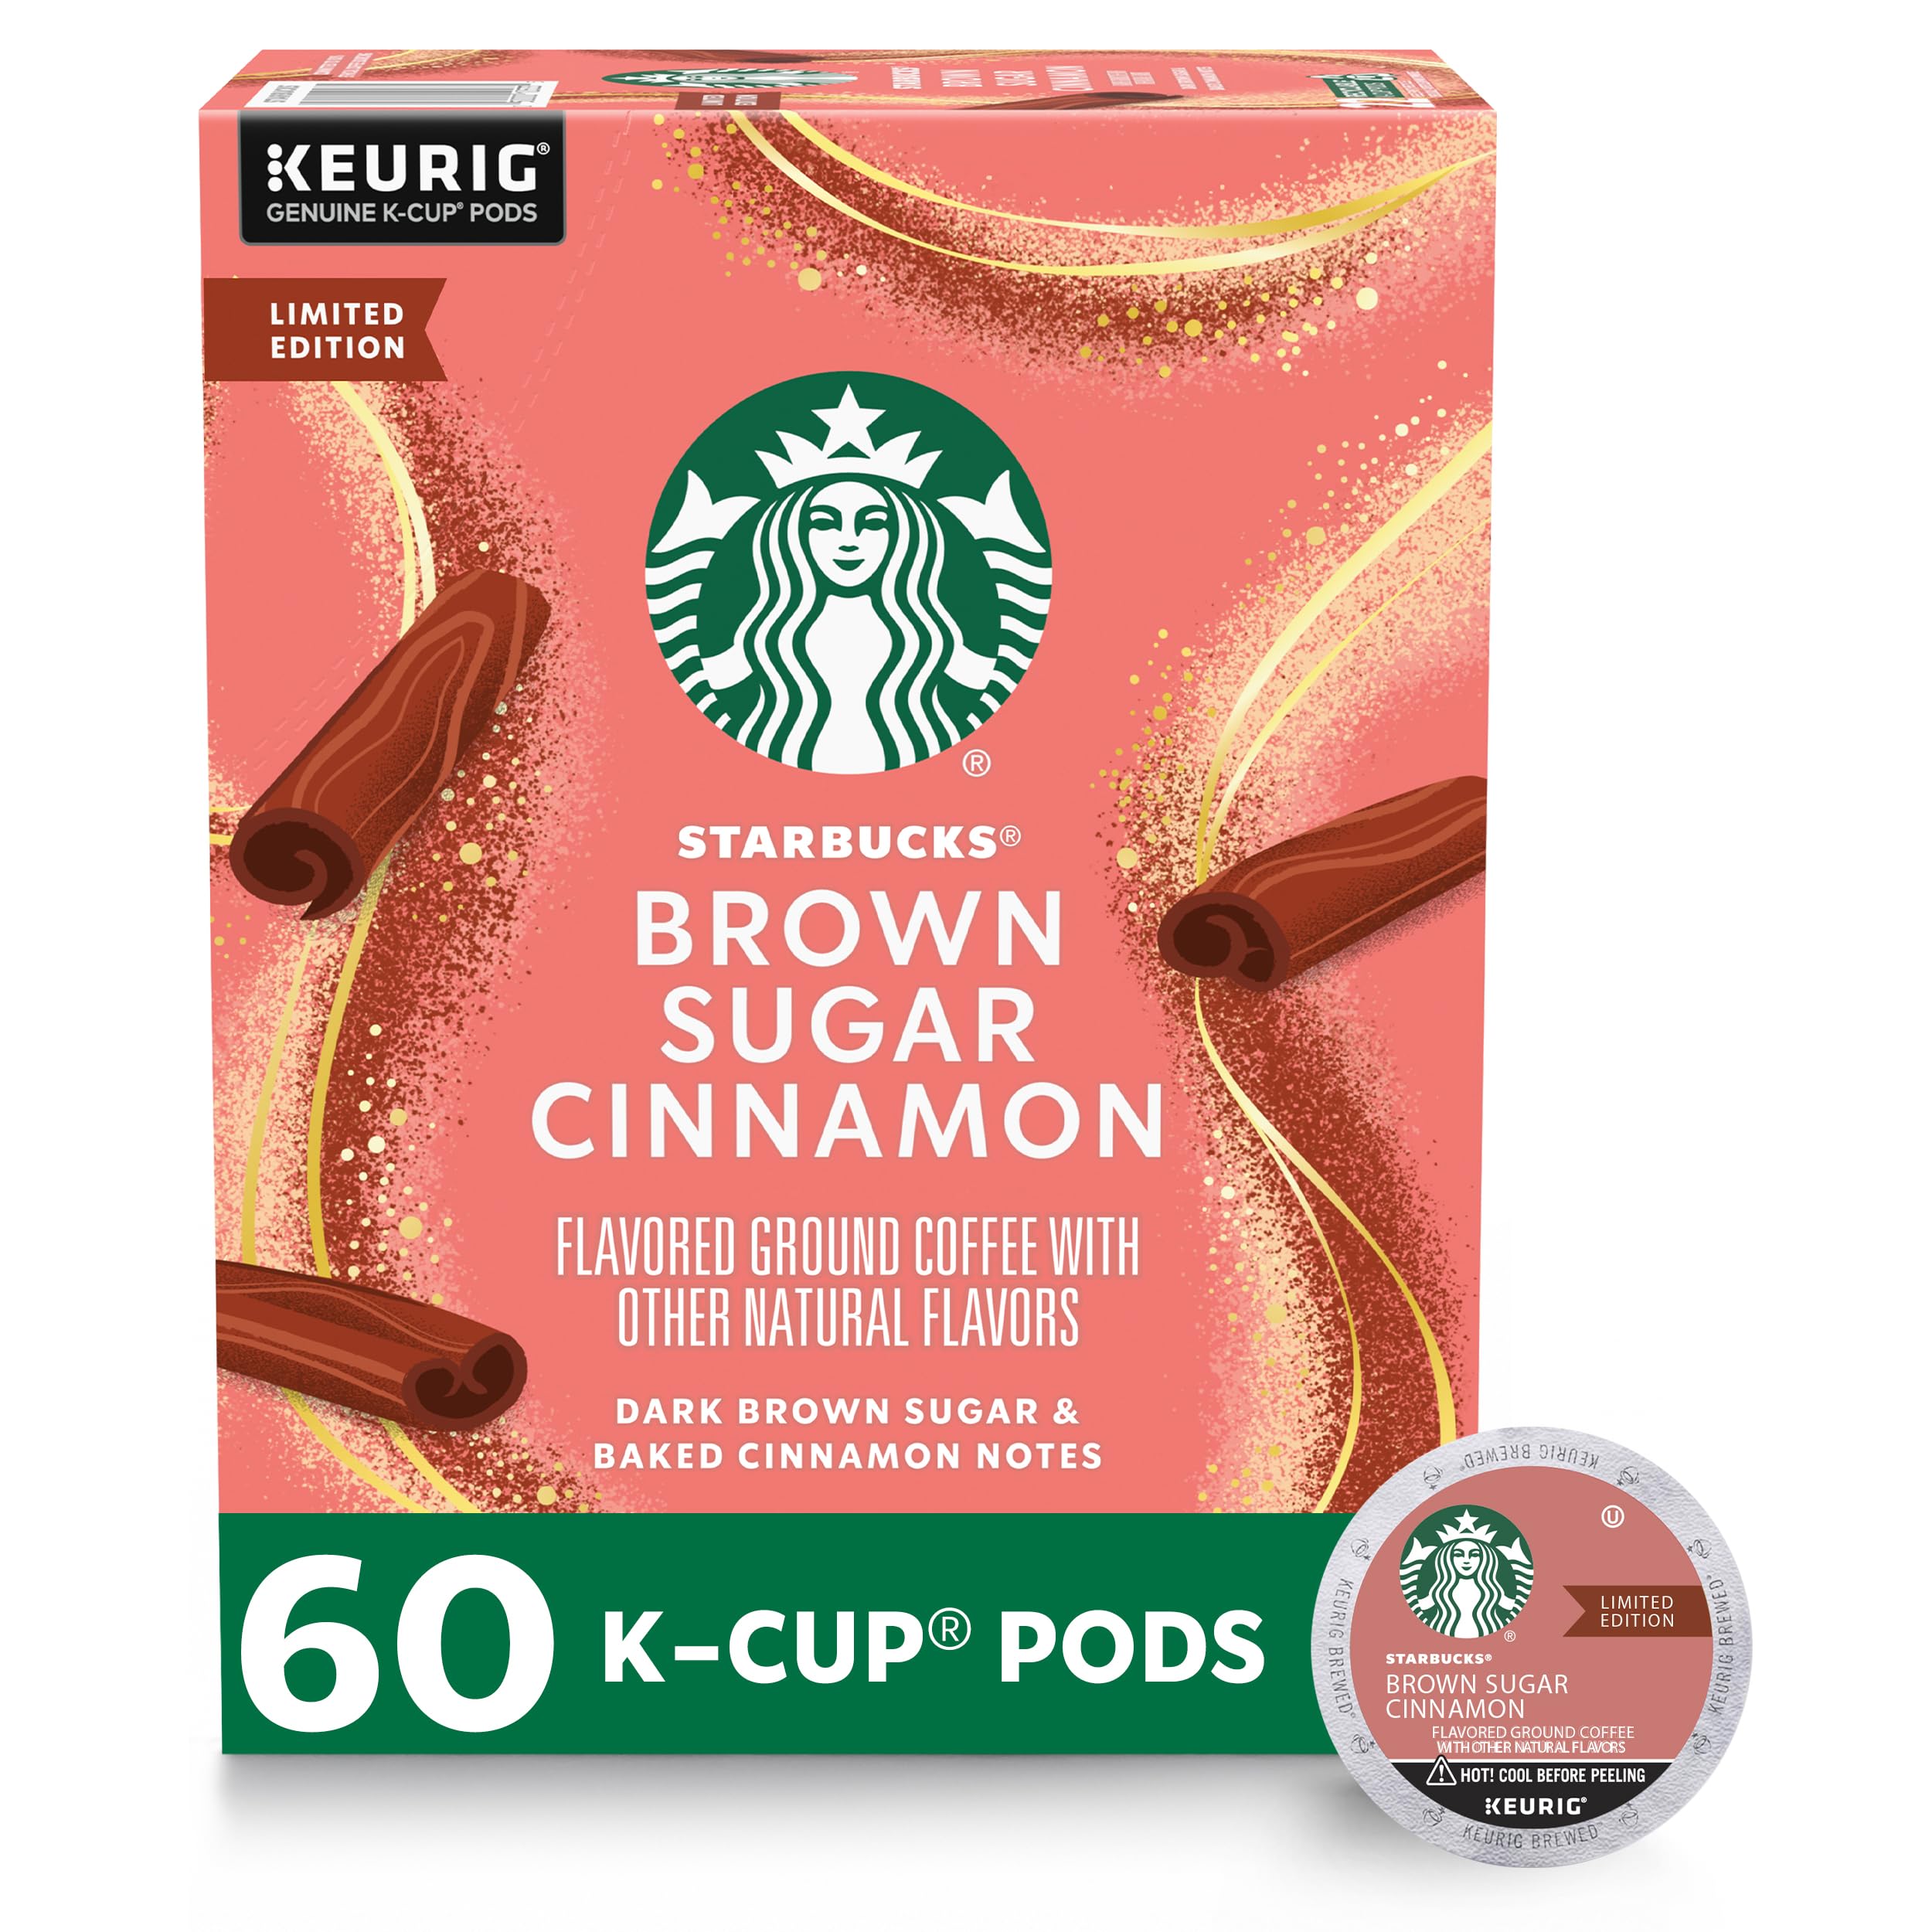 Starbucks K-Cup Coffee Pods, Brown Sugar Cinnamon Naturally Flavored Coffee For Keurig Coffee Makers, 100% Arabica, Limited Edition, 6 Boxes (60 Pods Total)